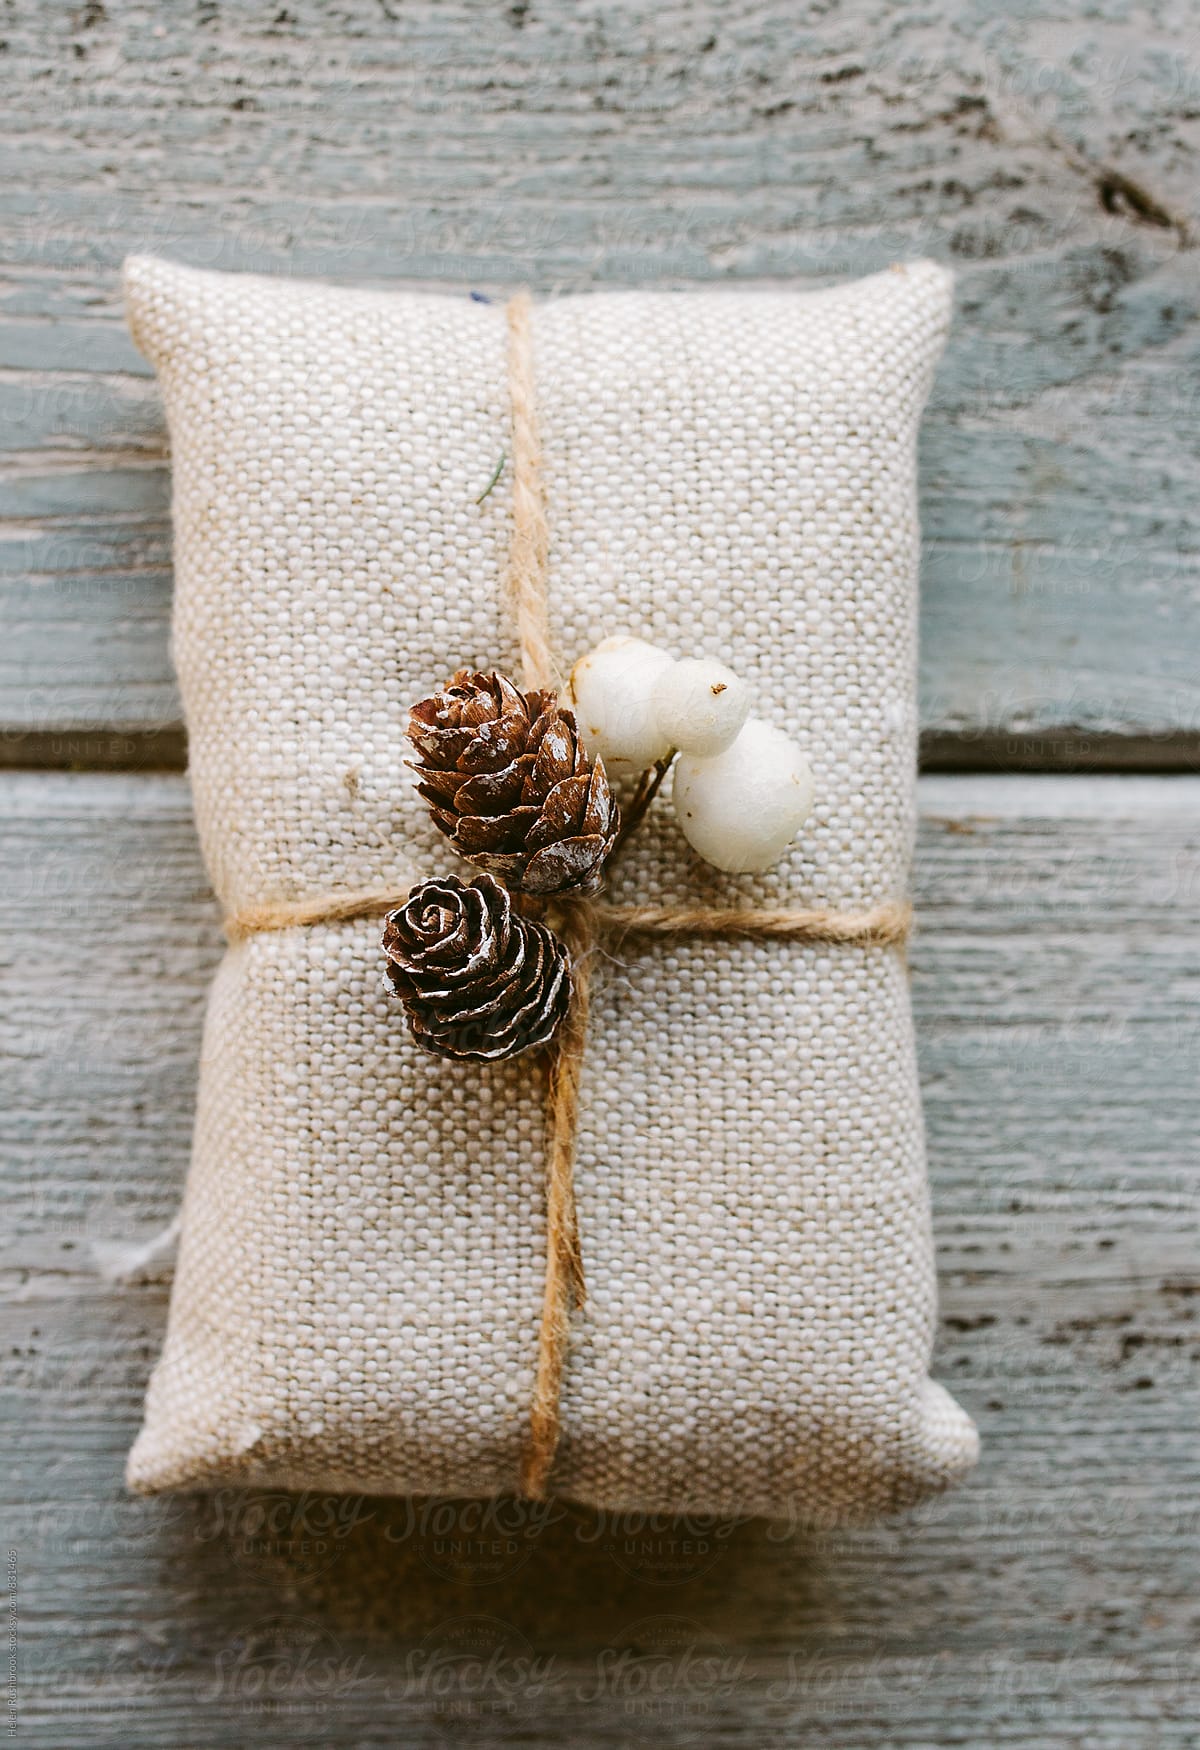 Christmas gift wrapped with linen and decorated with natural items.